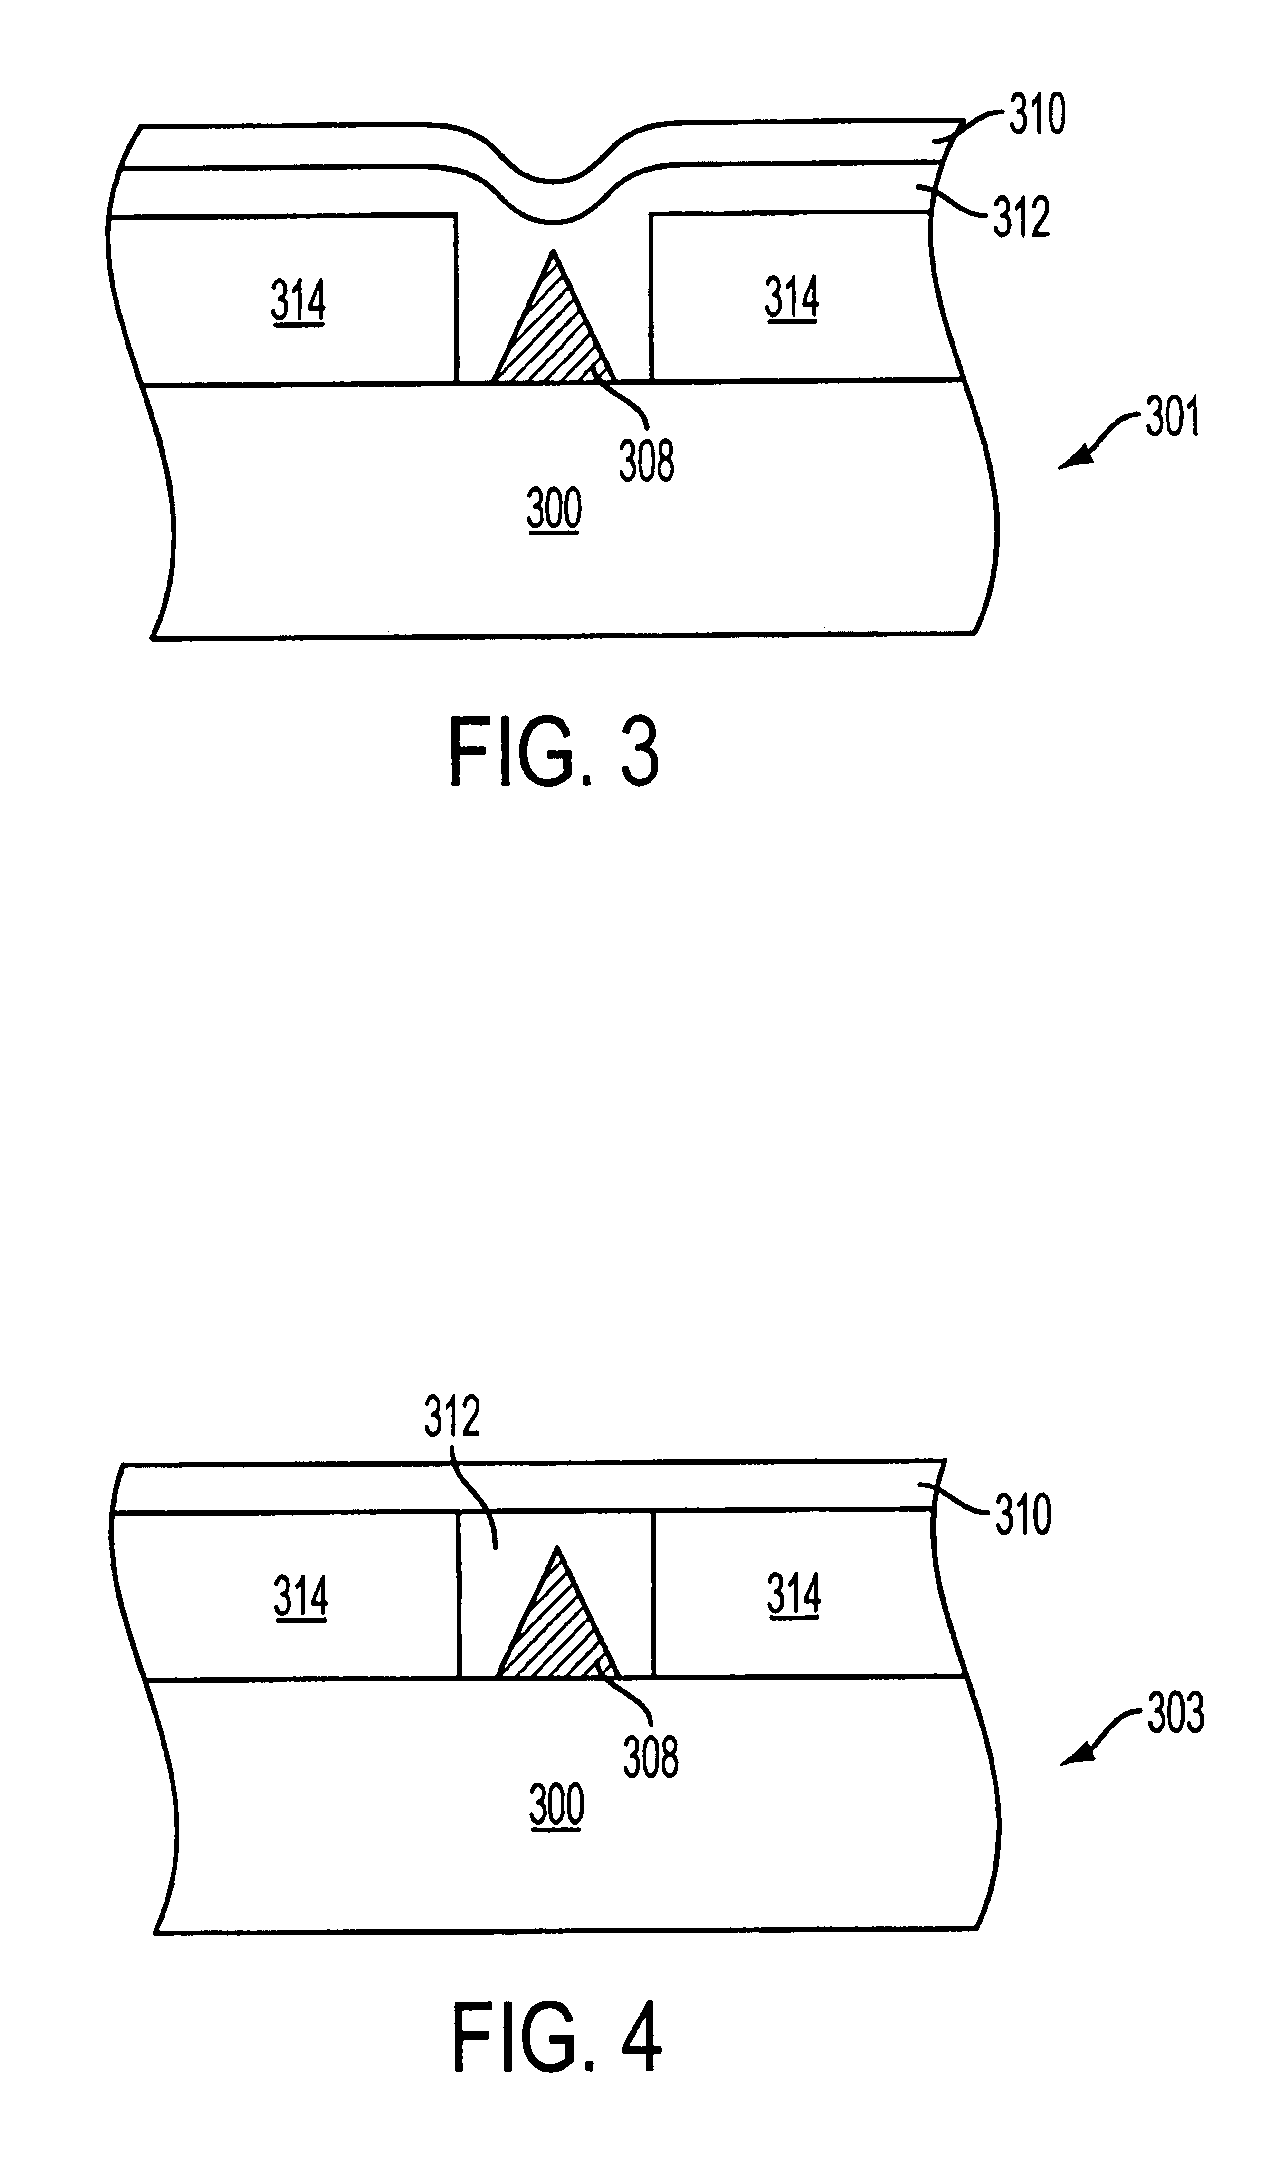 Reproducible resistance variable insulating memory devices having a shaped bottom electrode